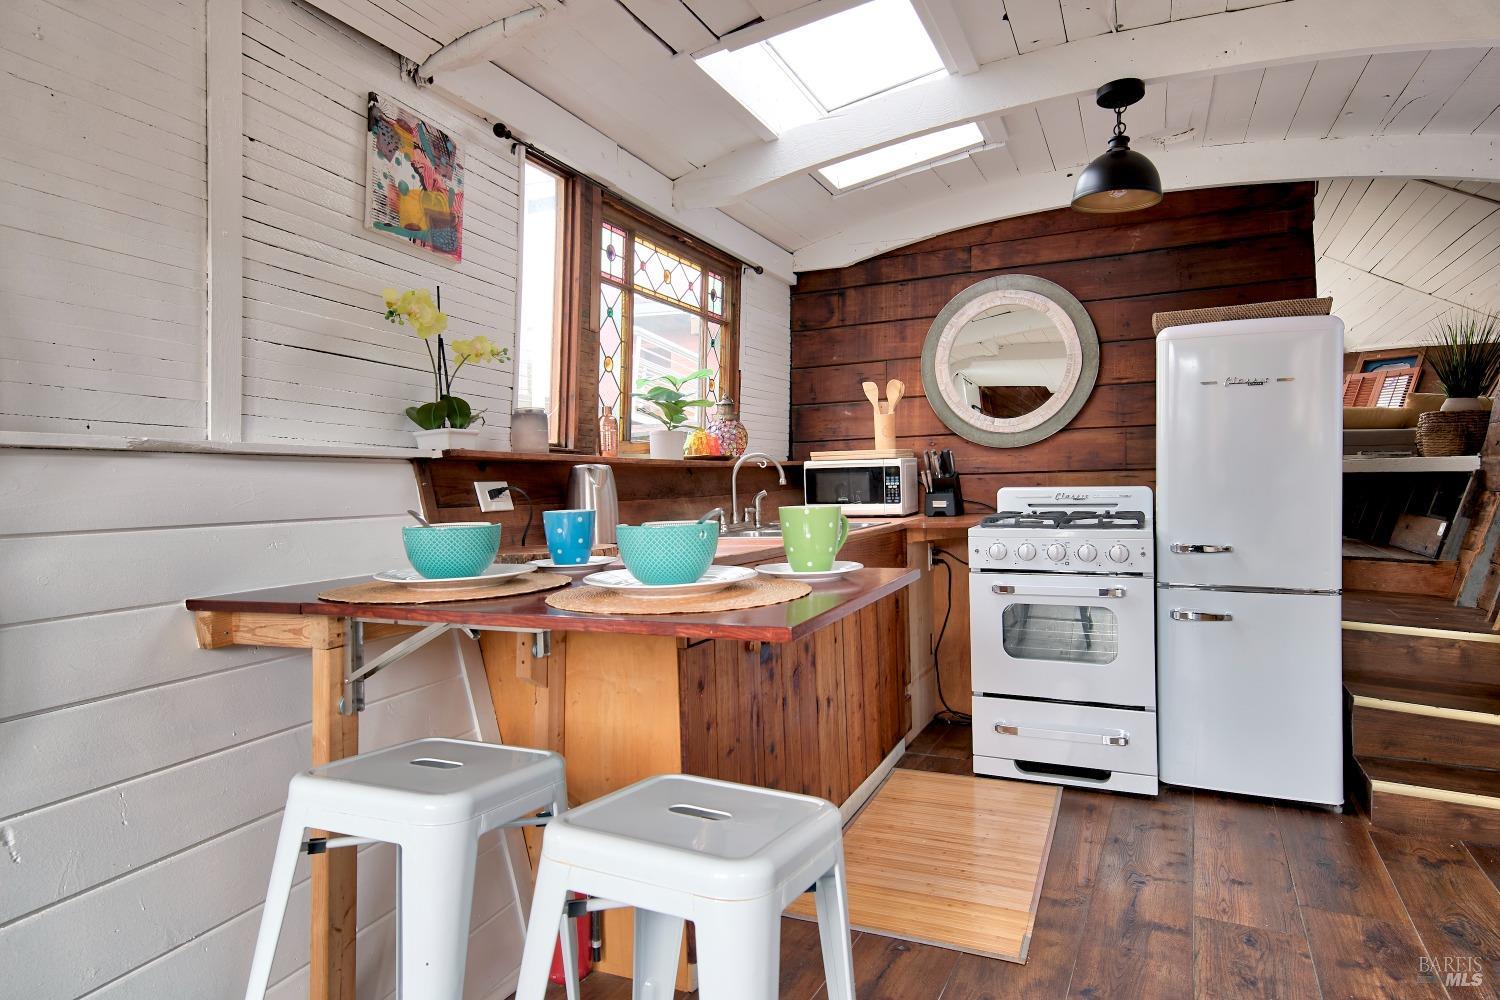 The charming kitchen with breakfast nook.